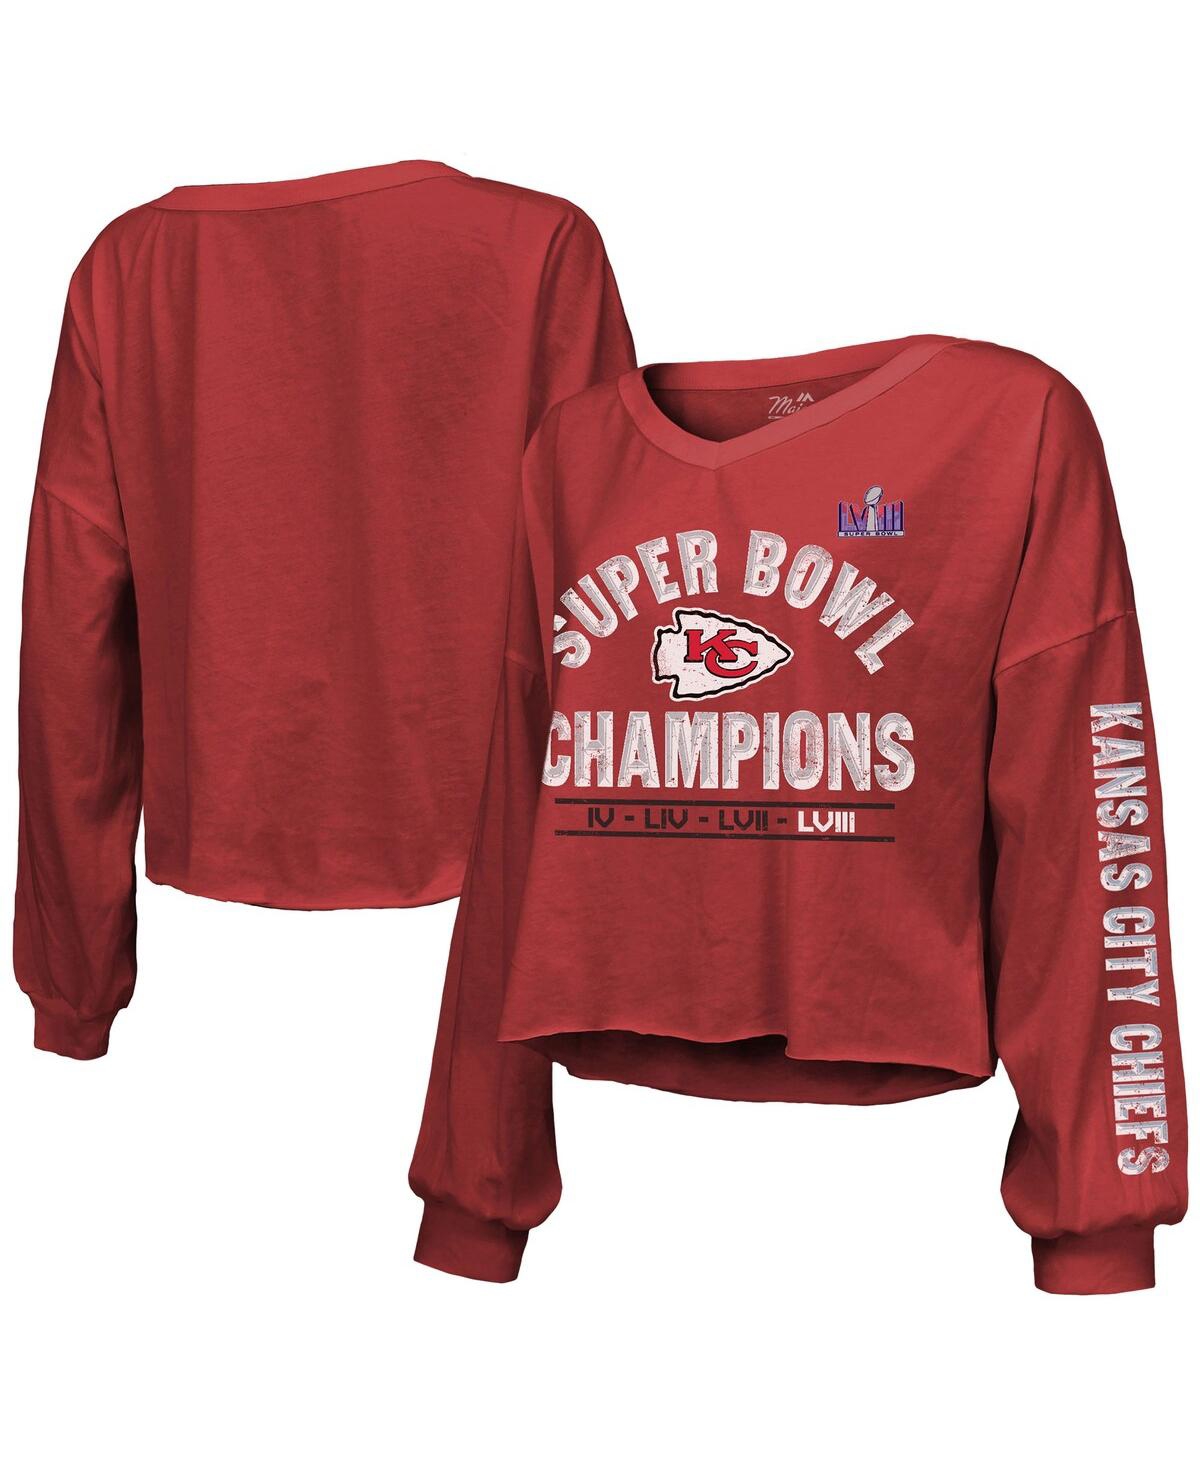 Women's Majestic Red Distressed Kansas City Chiefs Super Bowl Lviii Champions Always Champs Off-Shoulder Long Sleeve V-Neck T-shirt - Red